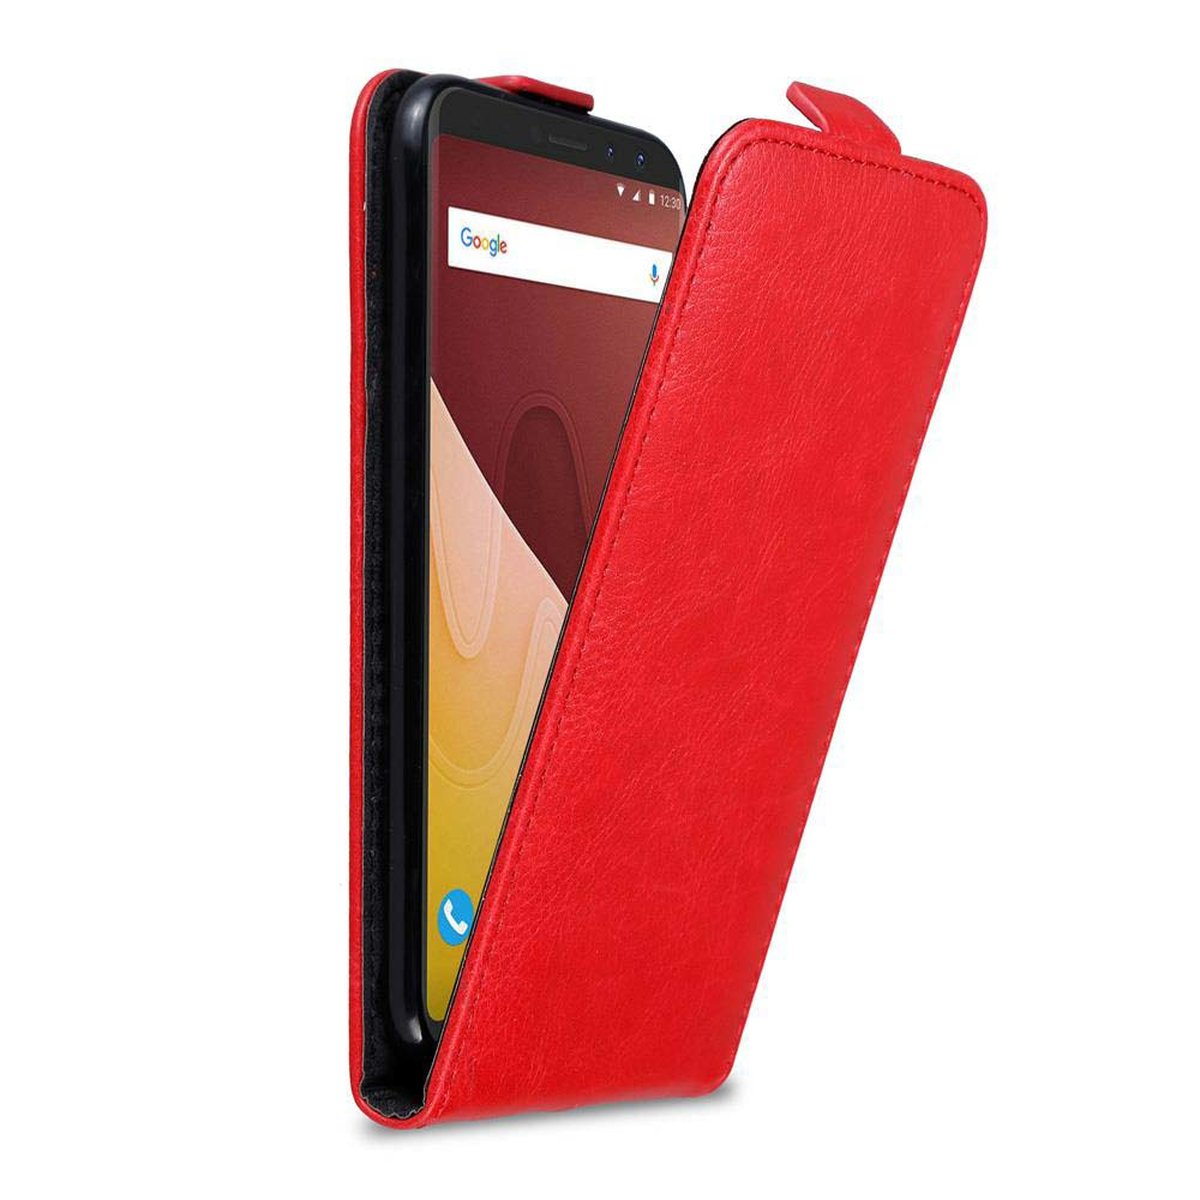 APFEL Cover, im GO, Style, Hülle Flip VIEW Flip ROT CADORABO WIKO,